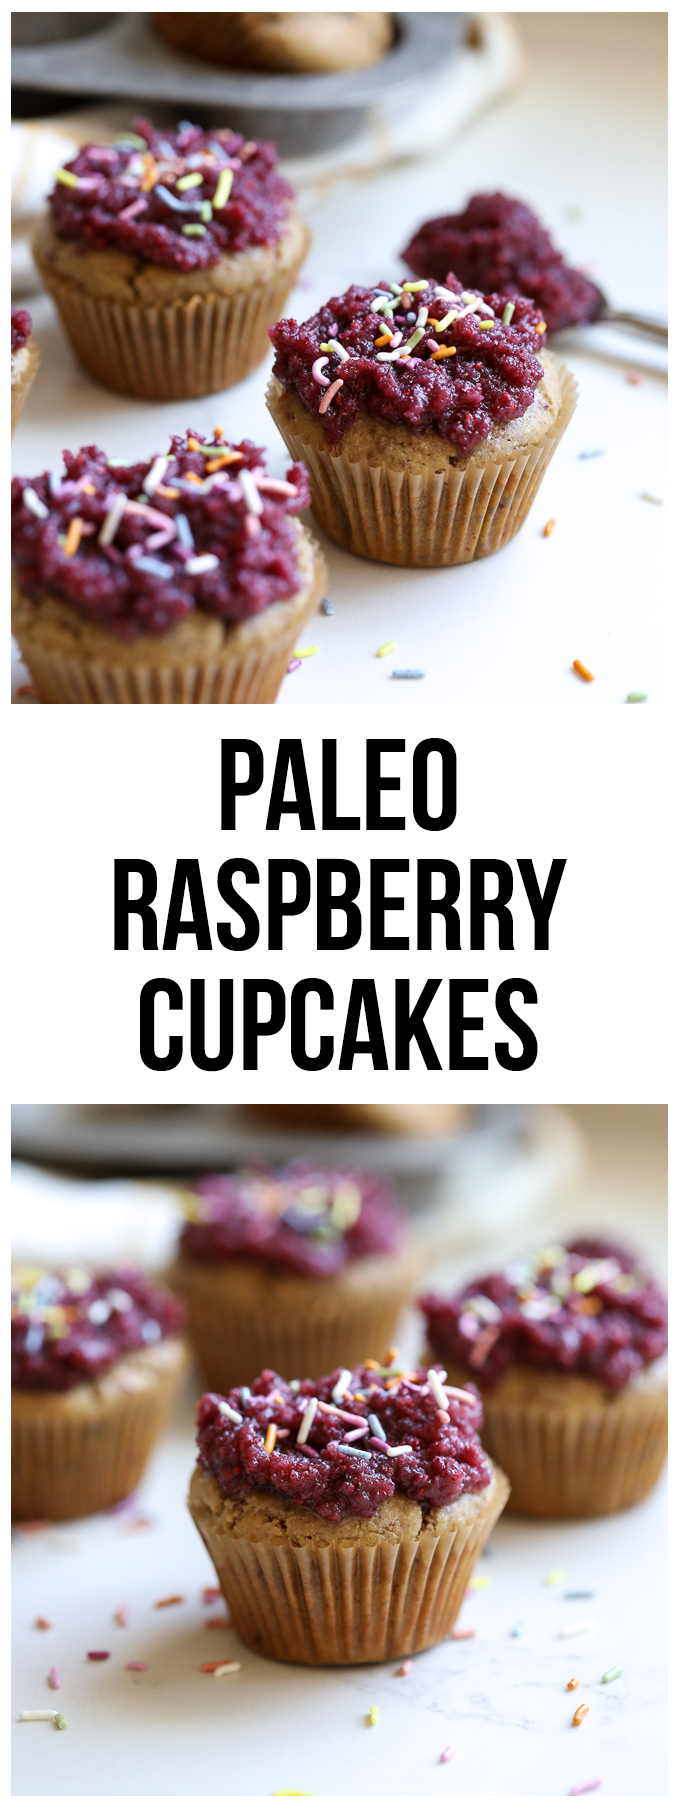 These Paleo Raspberry Vanilla Cupcakes are totally grain free and are sweetened with coconut sugar! Perfect for a birthday, bridal shower or any occasion!